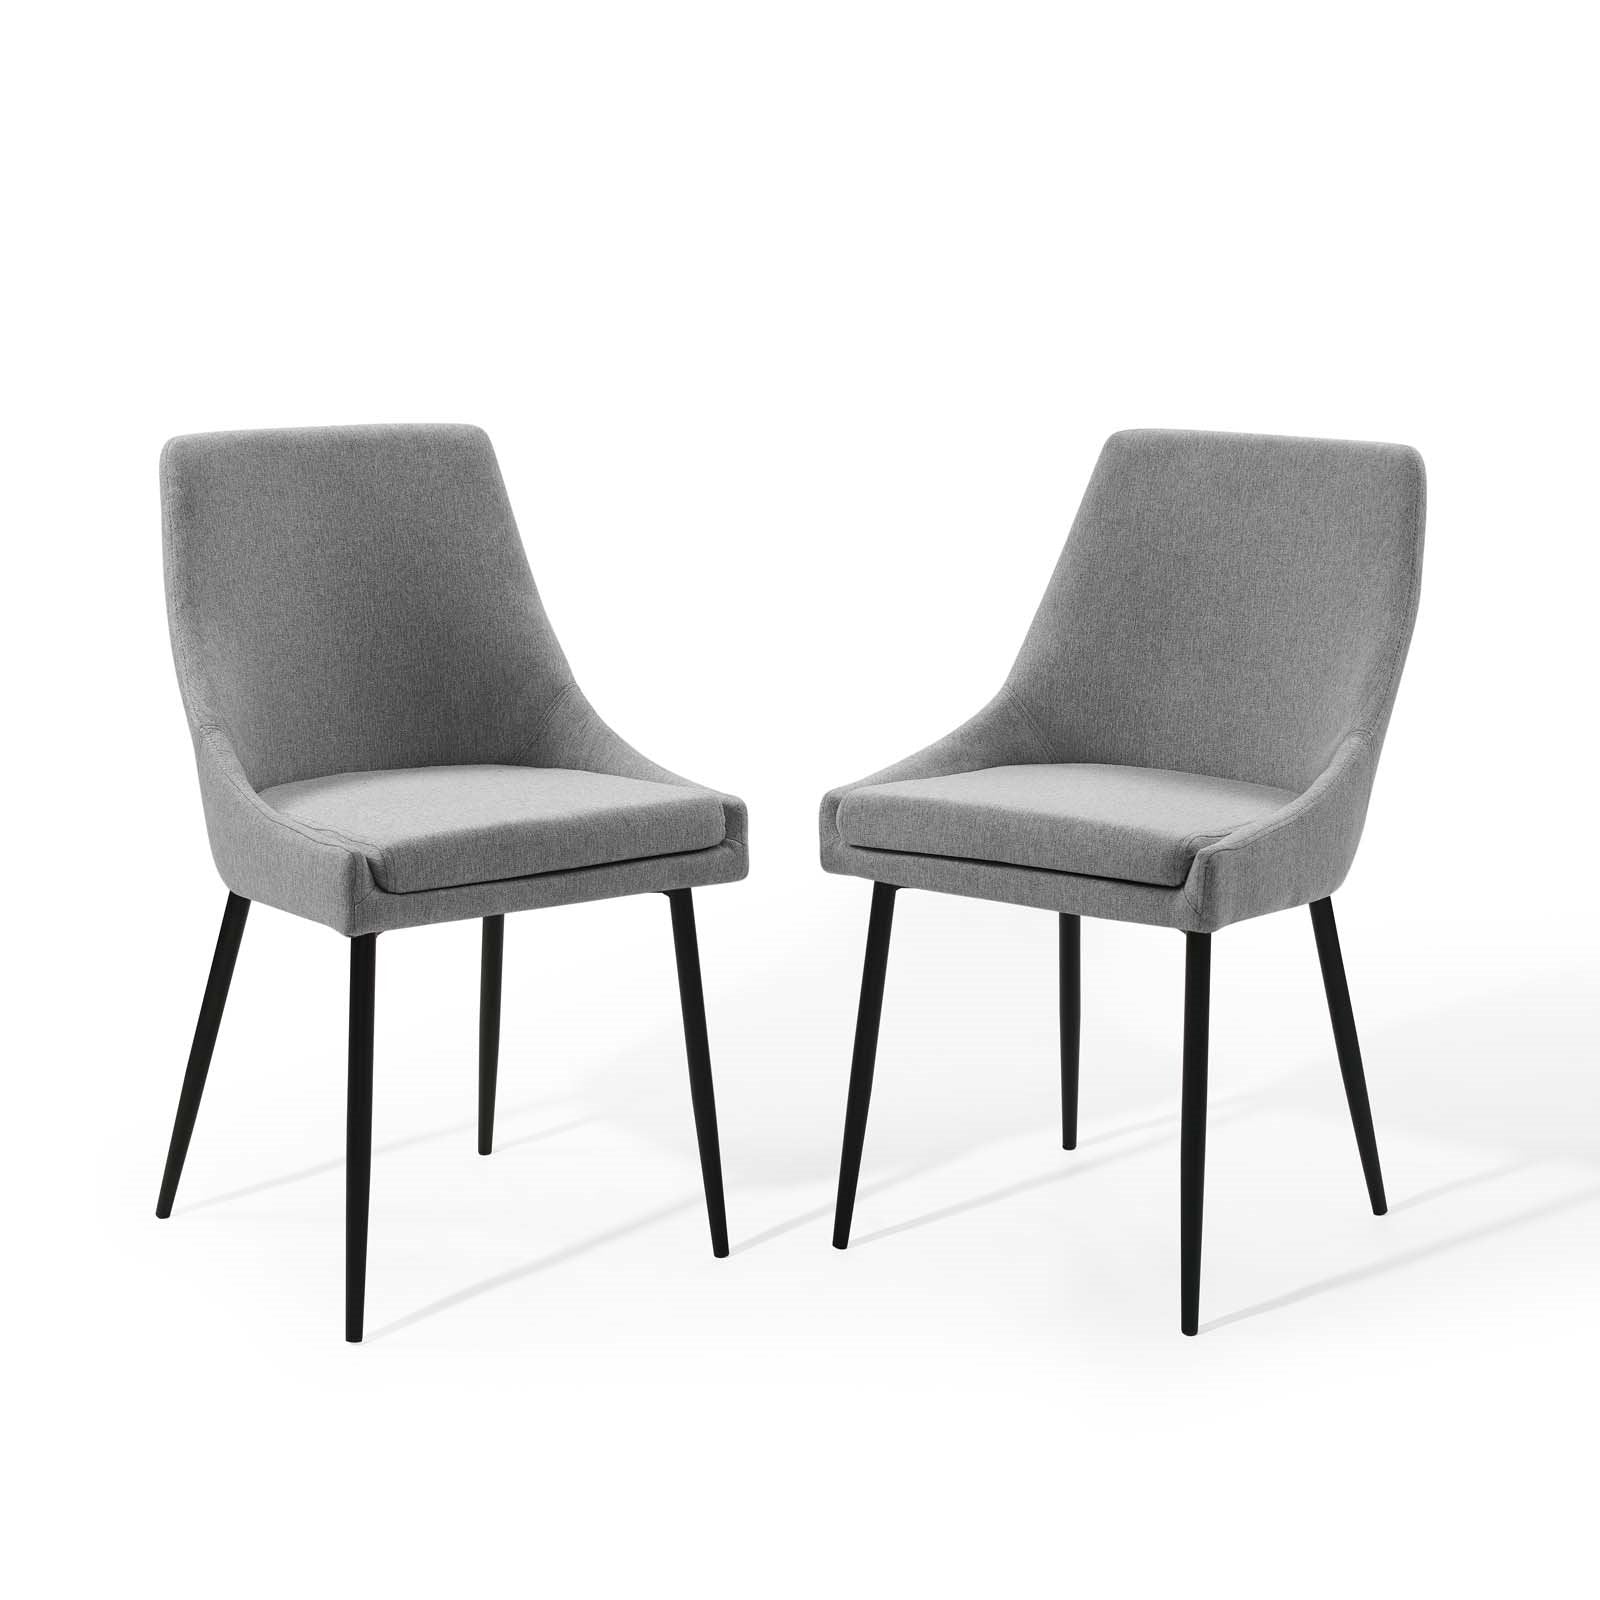 Upholstered Fabric Dining Chairs - Set of 2